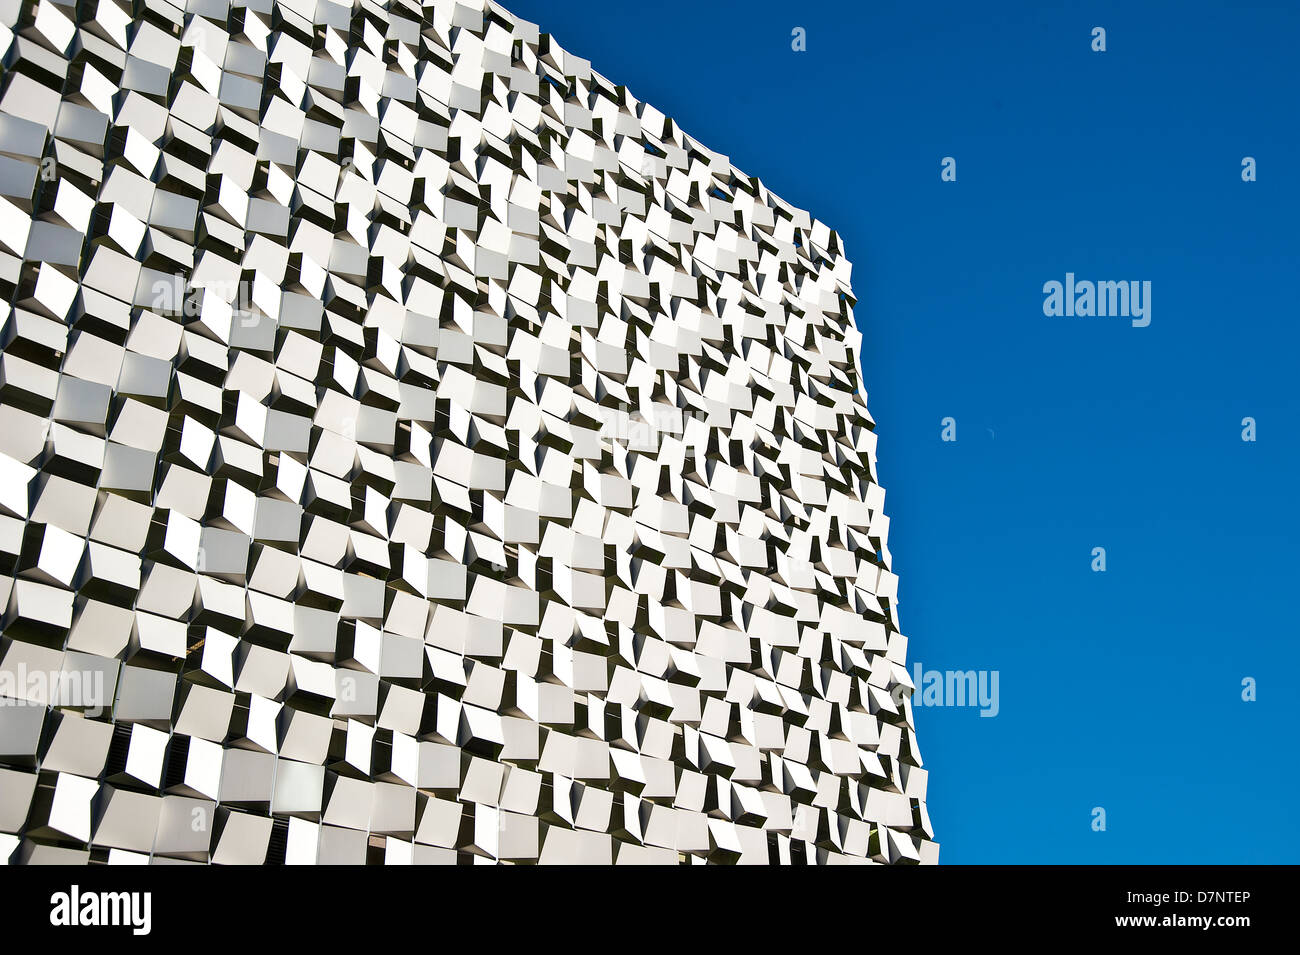 Sheffield Cheese Grater building Stock Photo